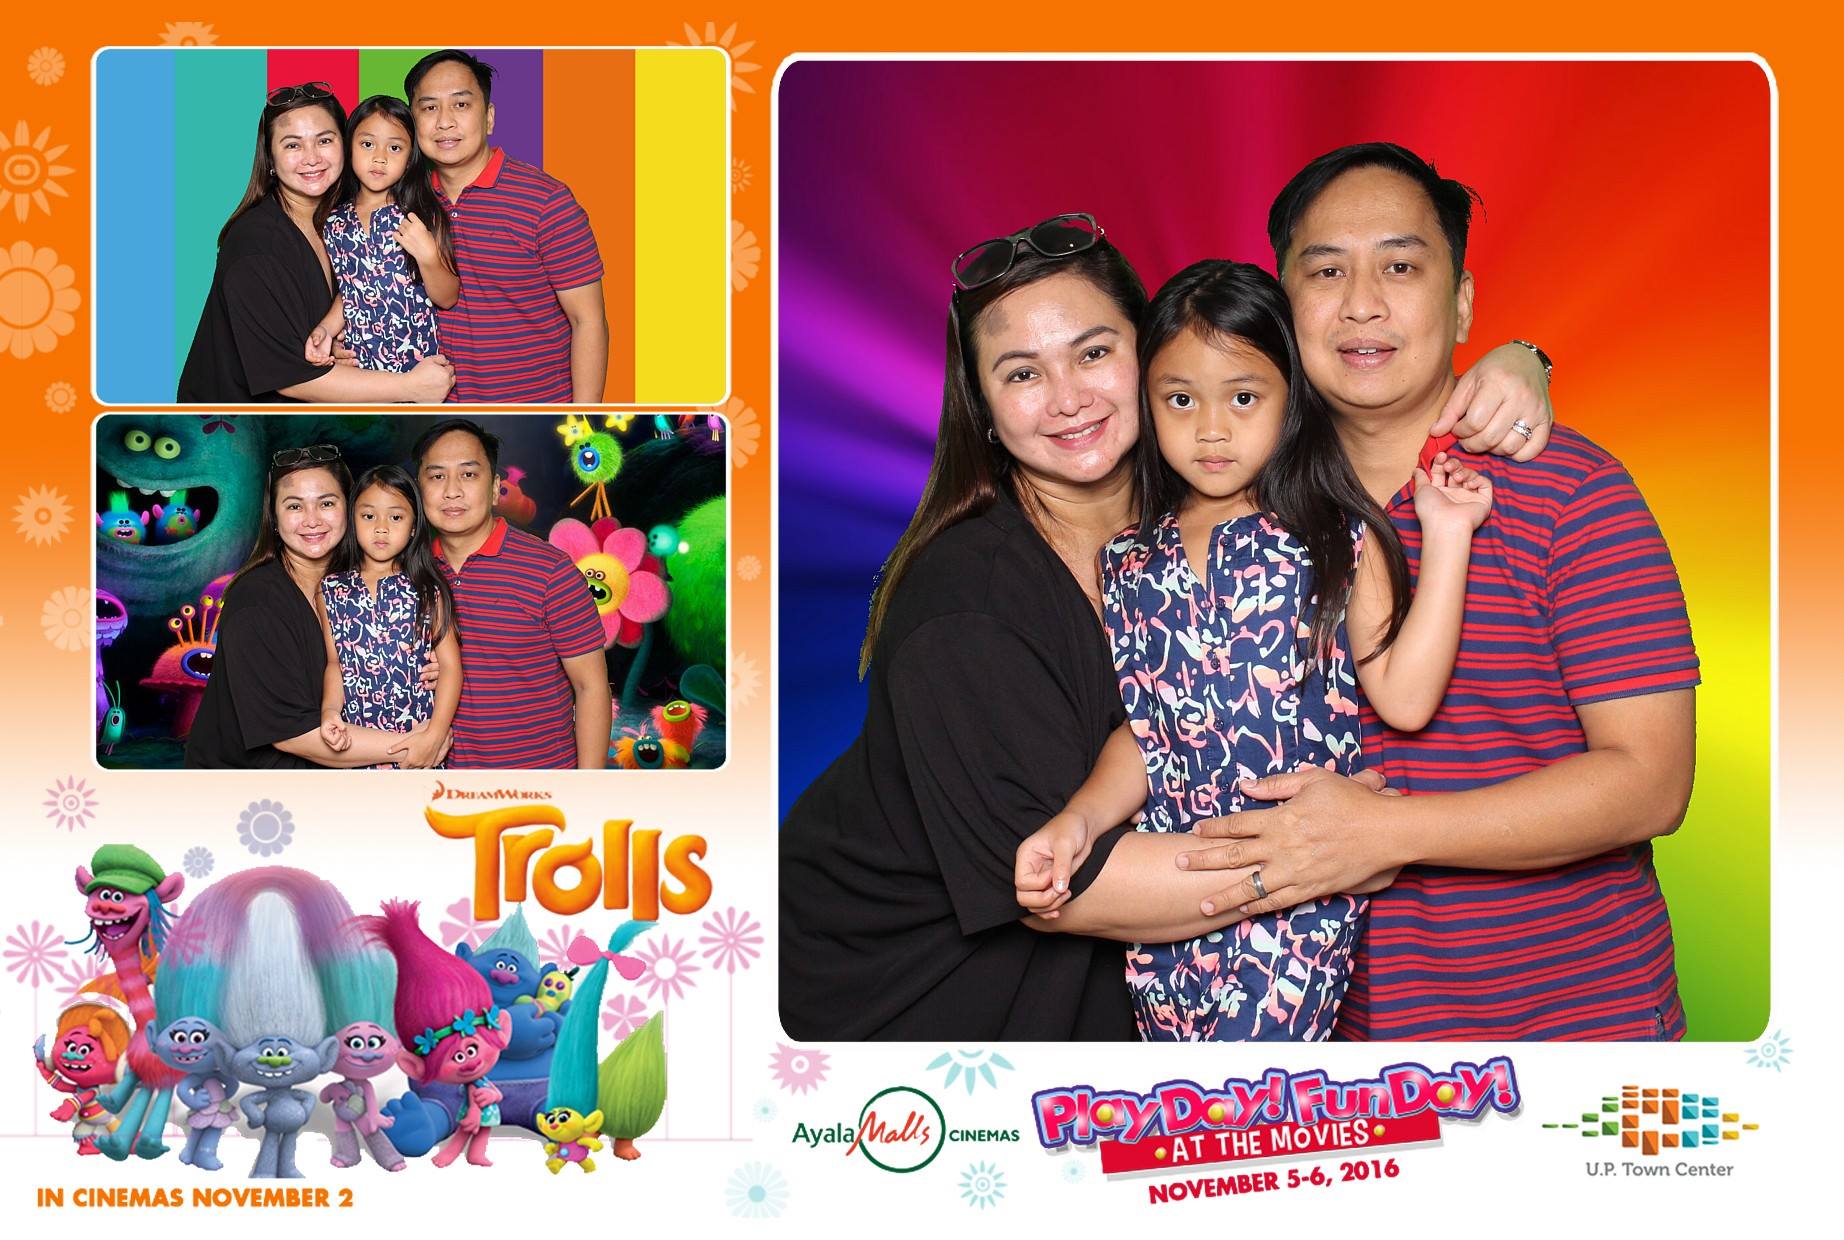 Play Day Fun Day @ UP Town Center Cinemas with Trolls